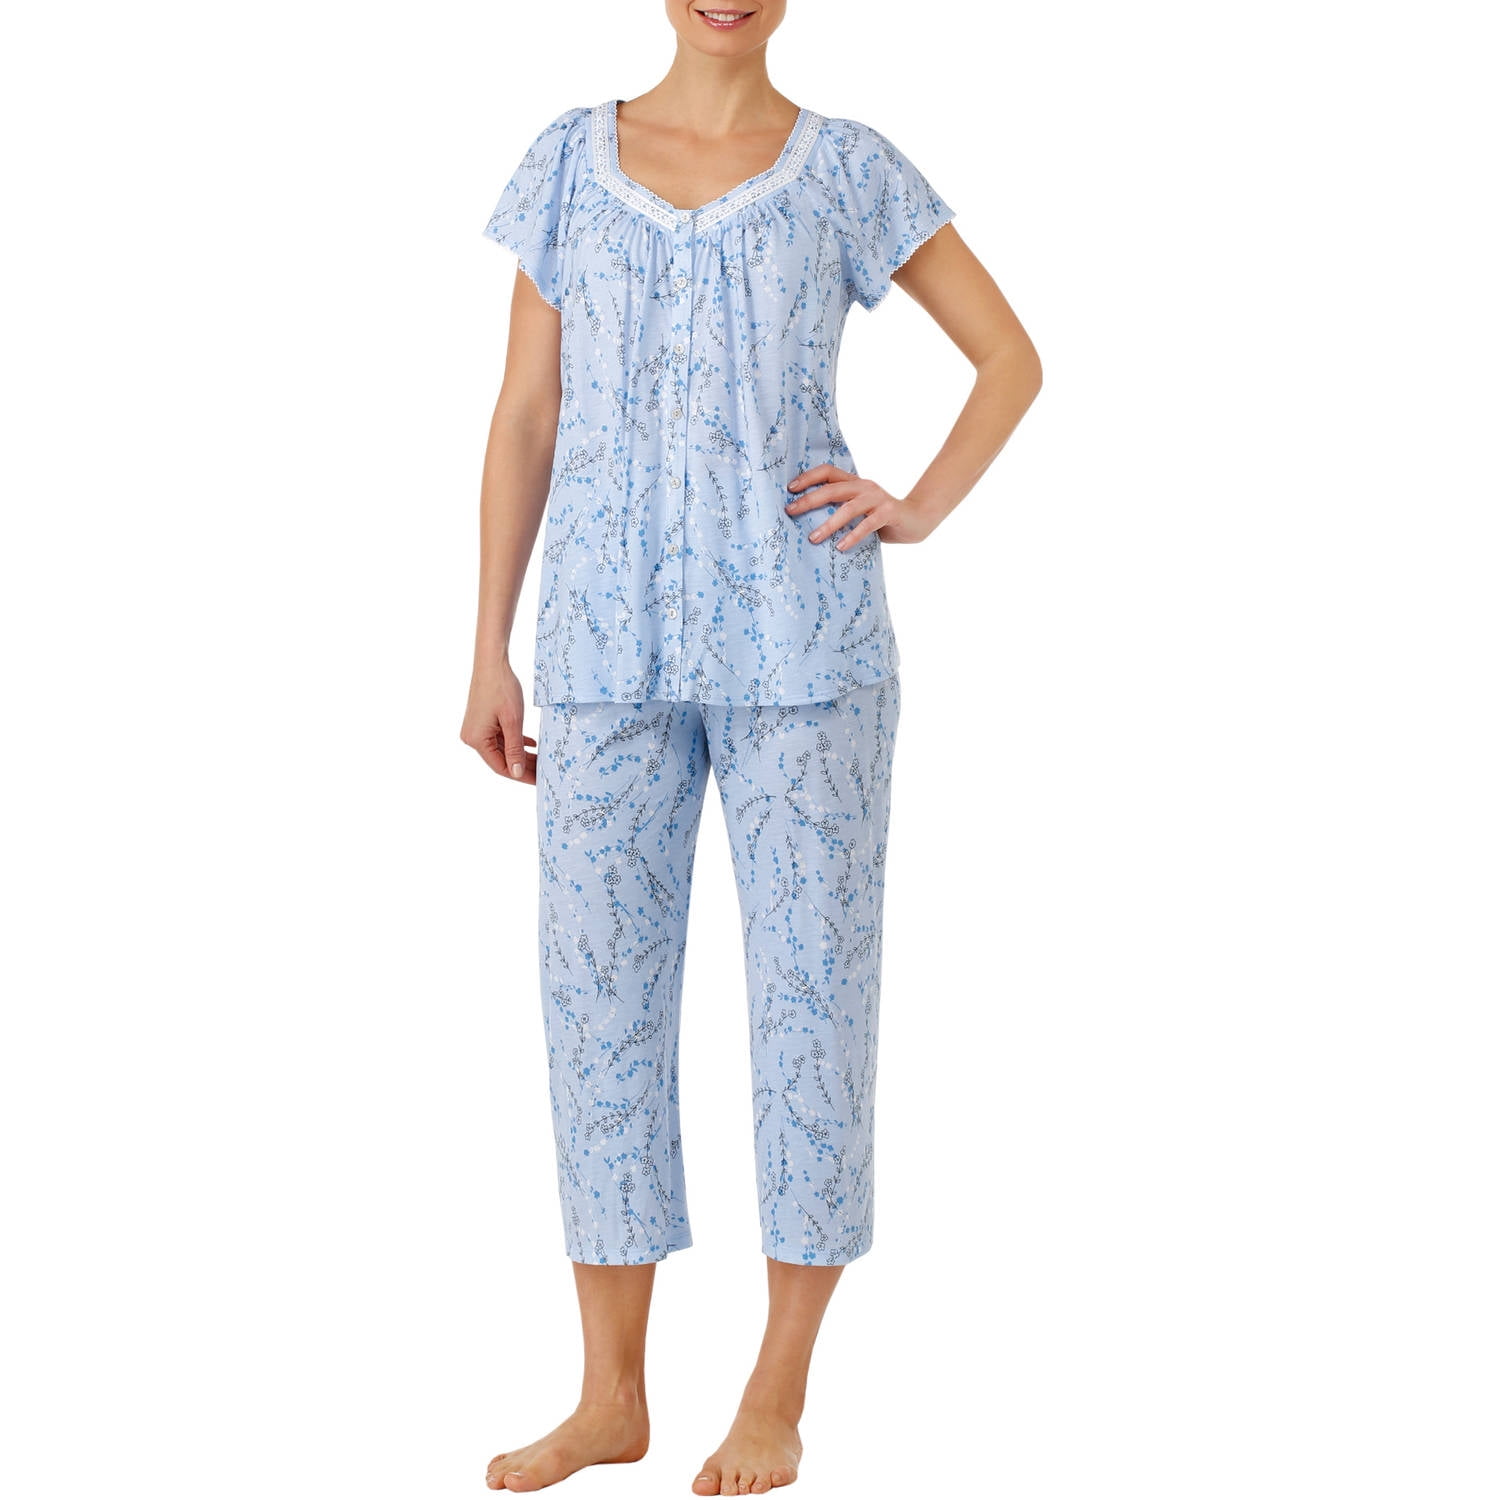 Women's and Women's Plus Traditional Pajama Short Sleeve Sweetheart ...